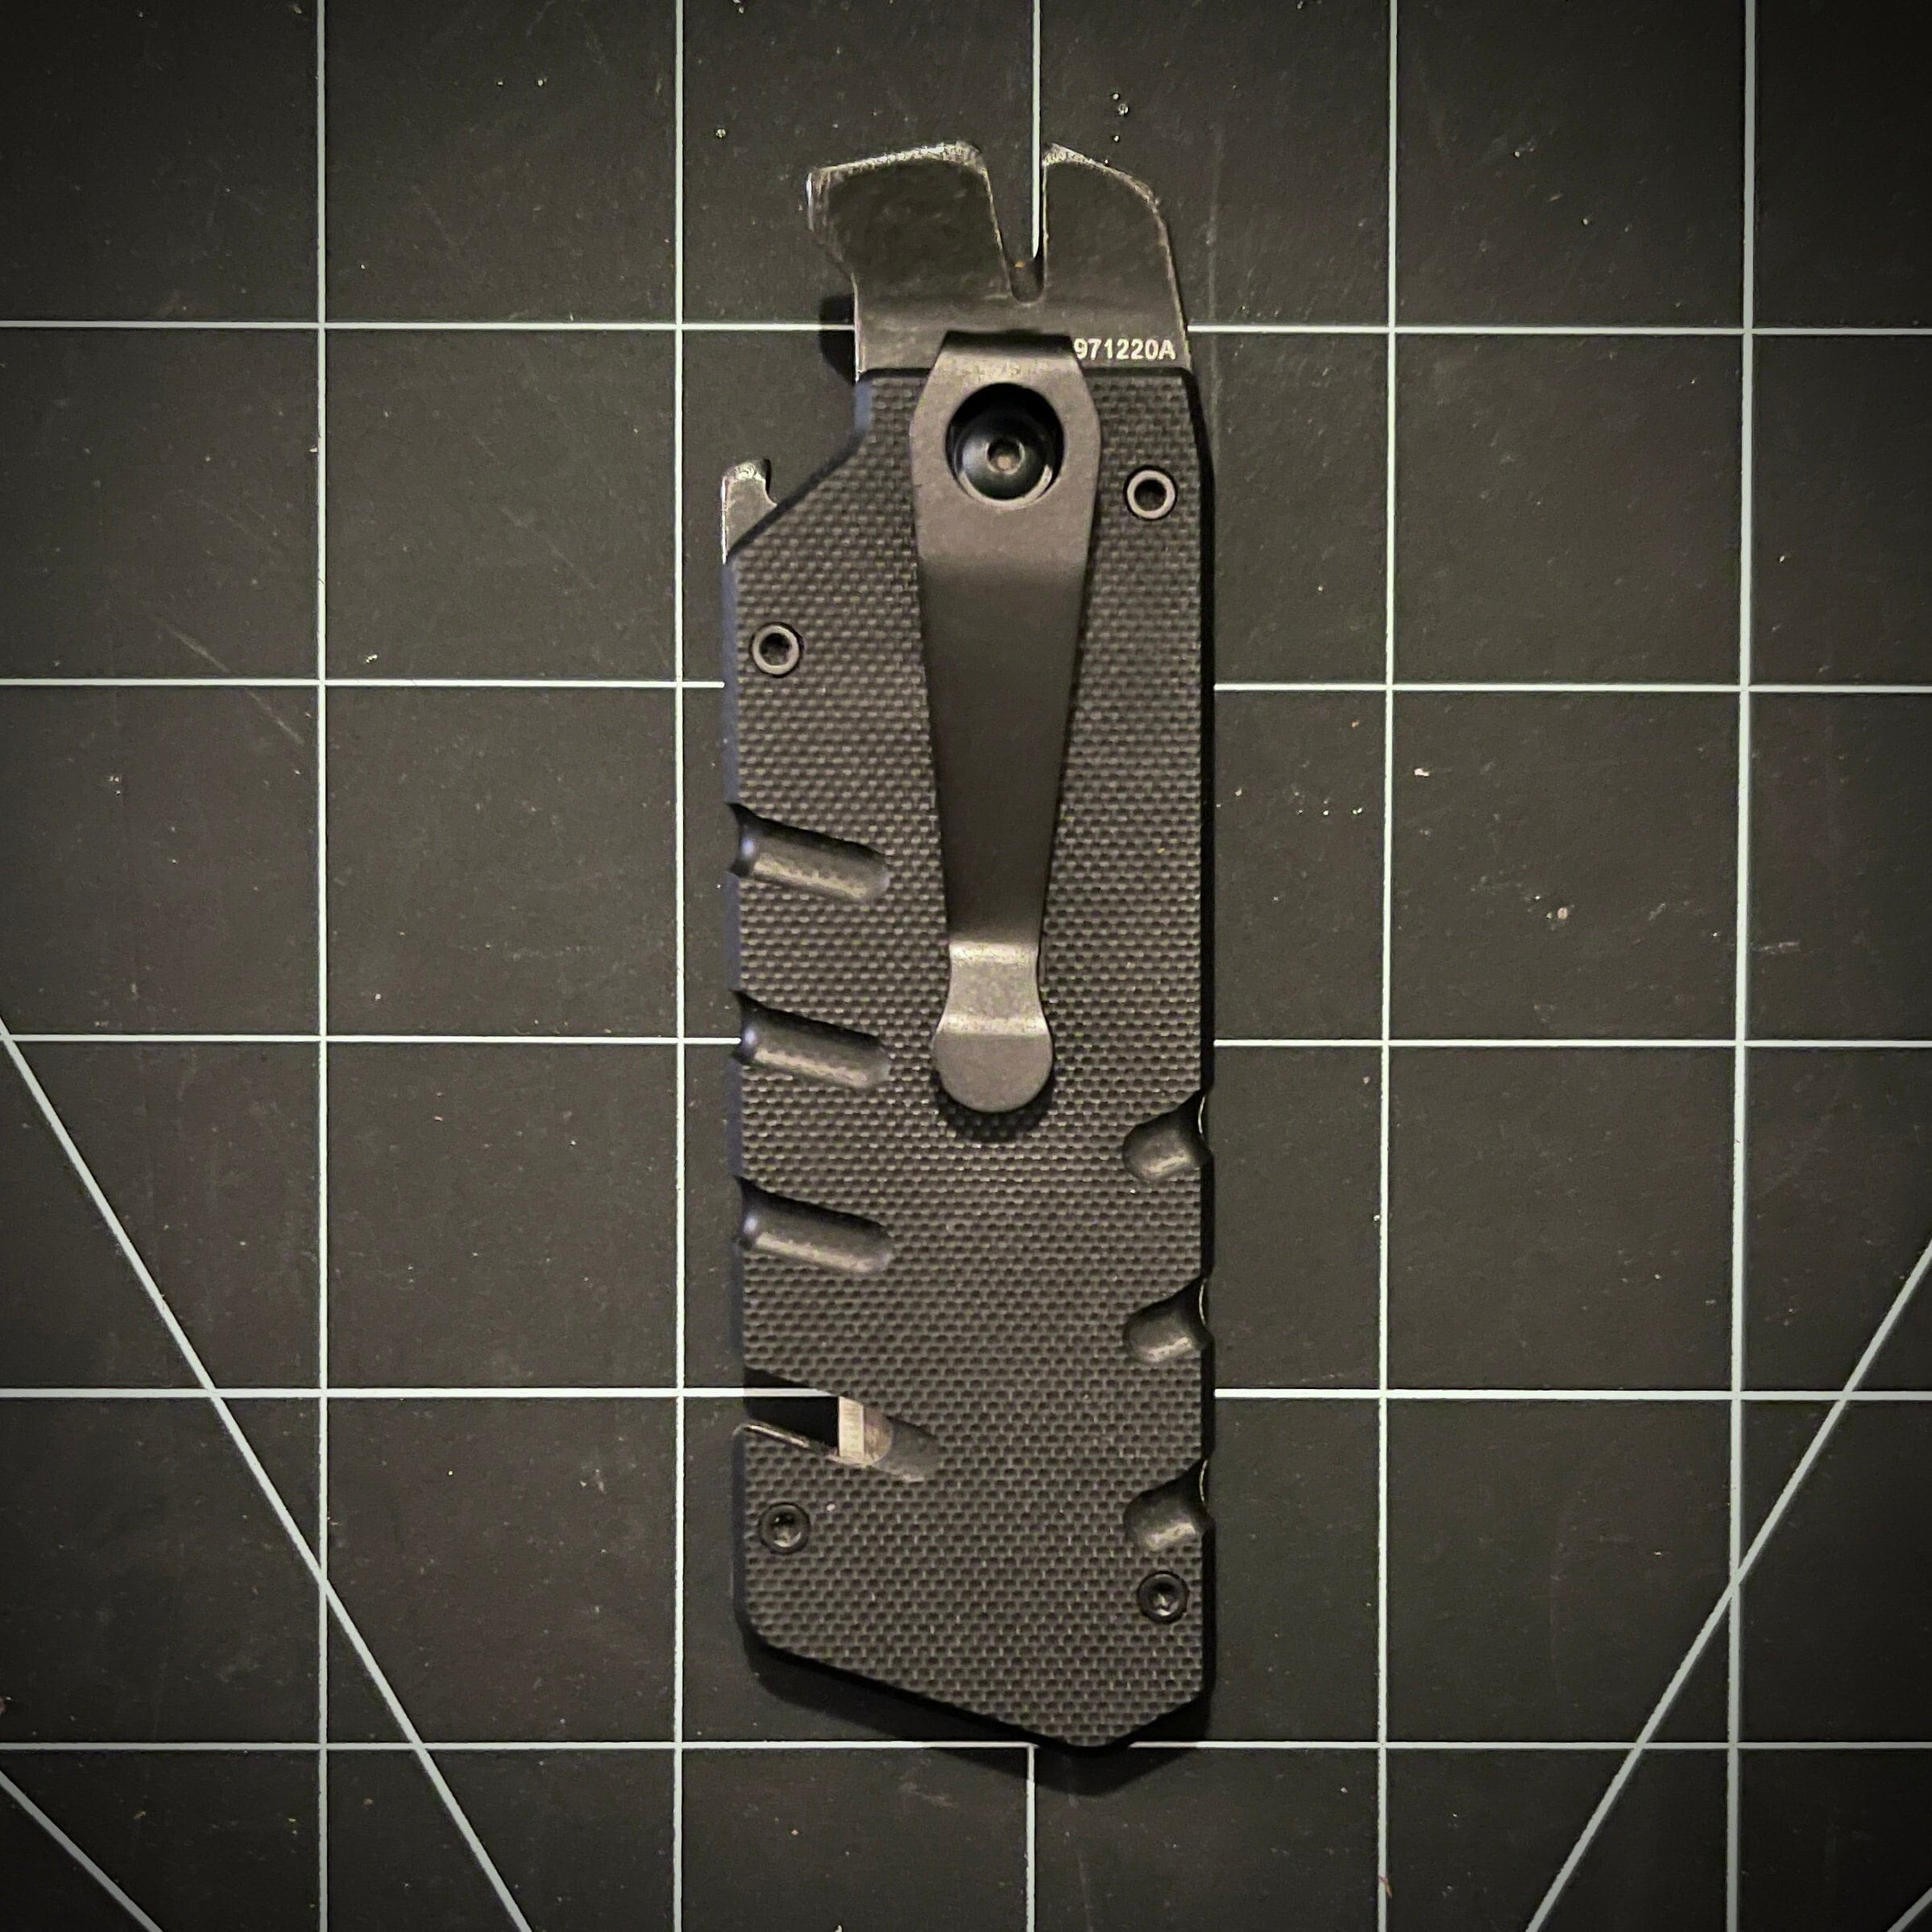 Gerber Prybrid Utility Knife Review - 8 Tools in 1, but is it any Good? 